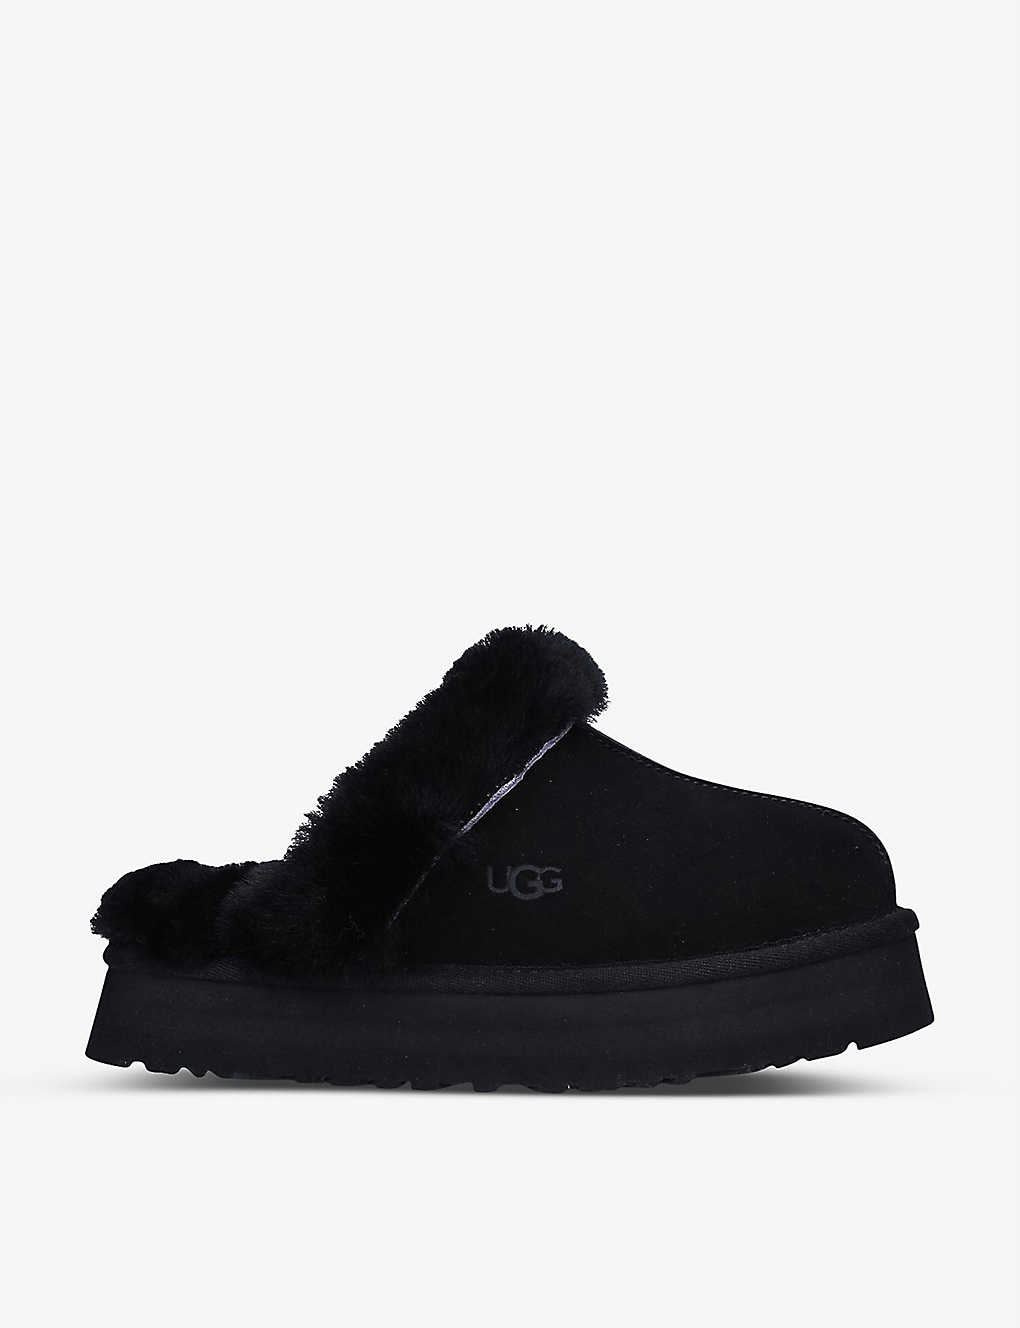 Shop Ugg Women's Black Disquette Shearling-lined Suede Slippers